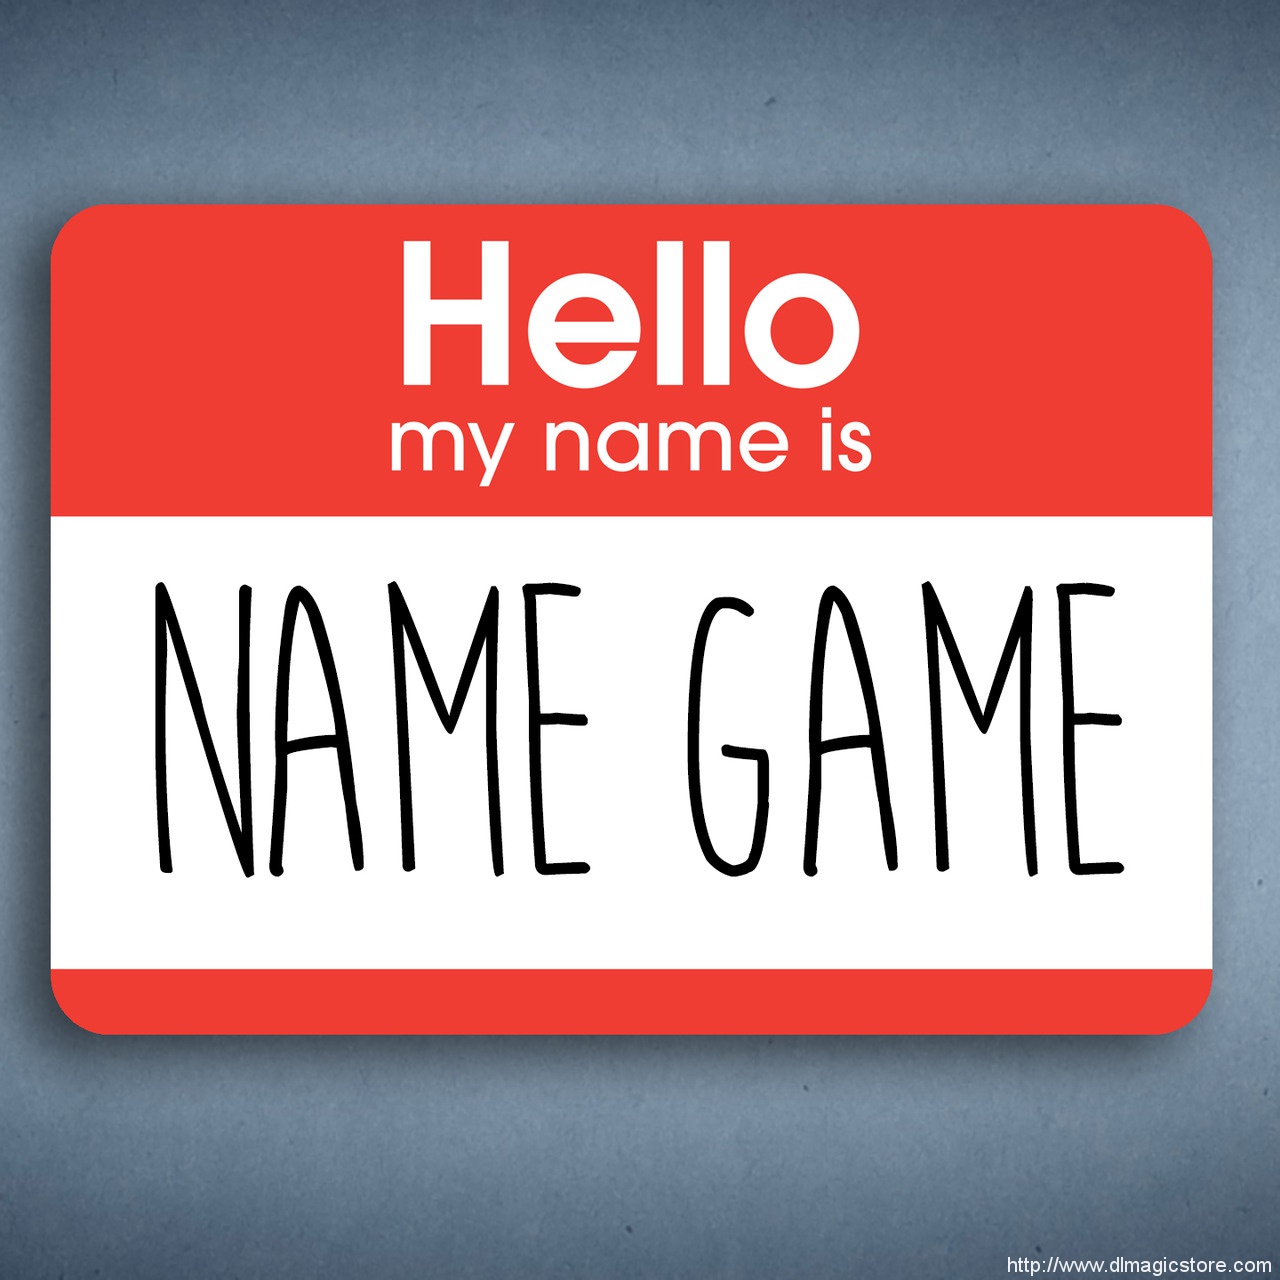 Name Game by Spidey & Rick Lax